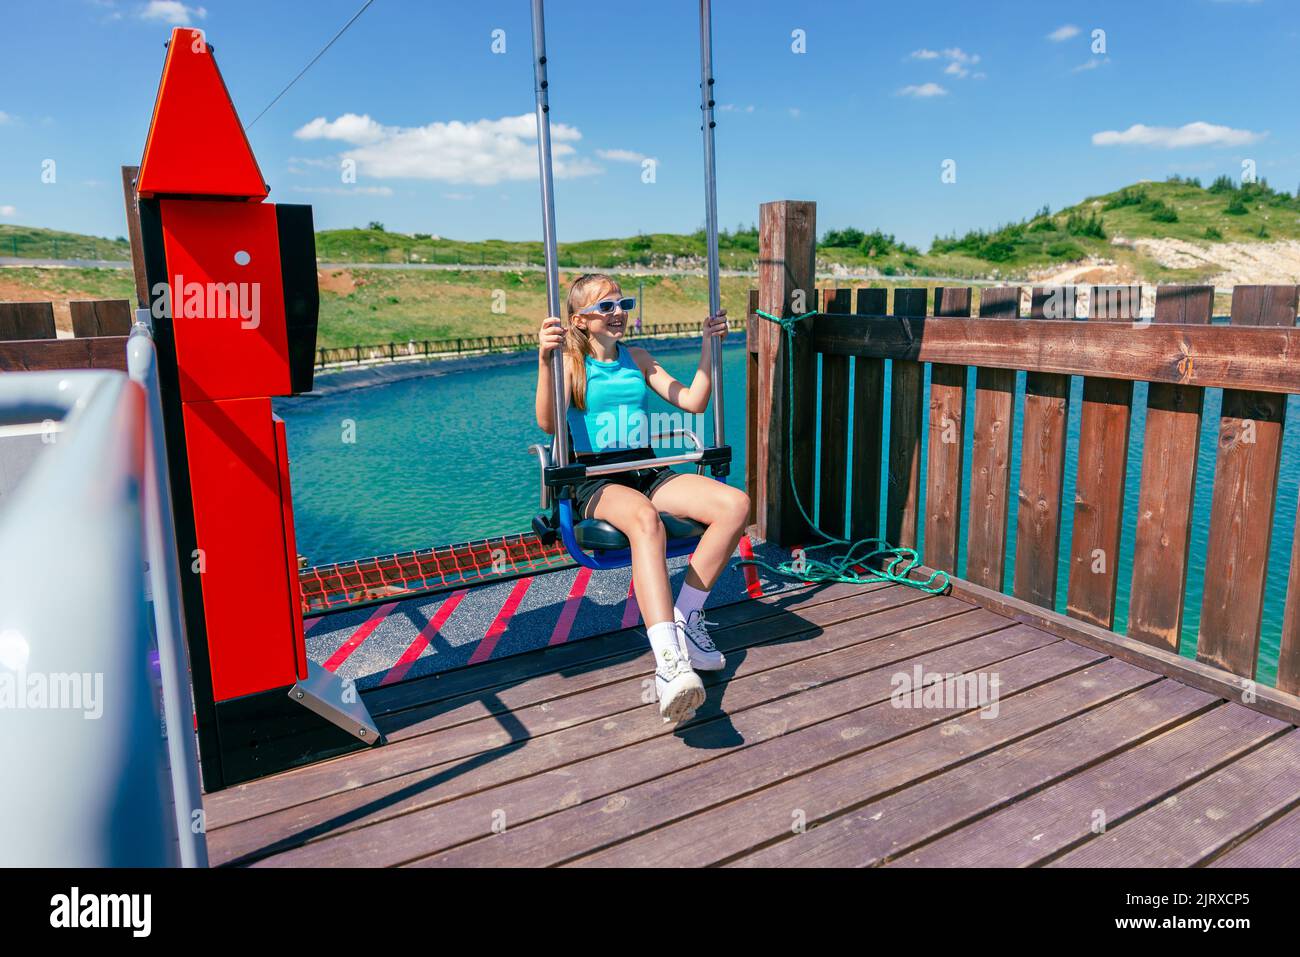 Girl arrives on a skydive chair in a mountain adventure park. Lake in background Stock Photo